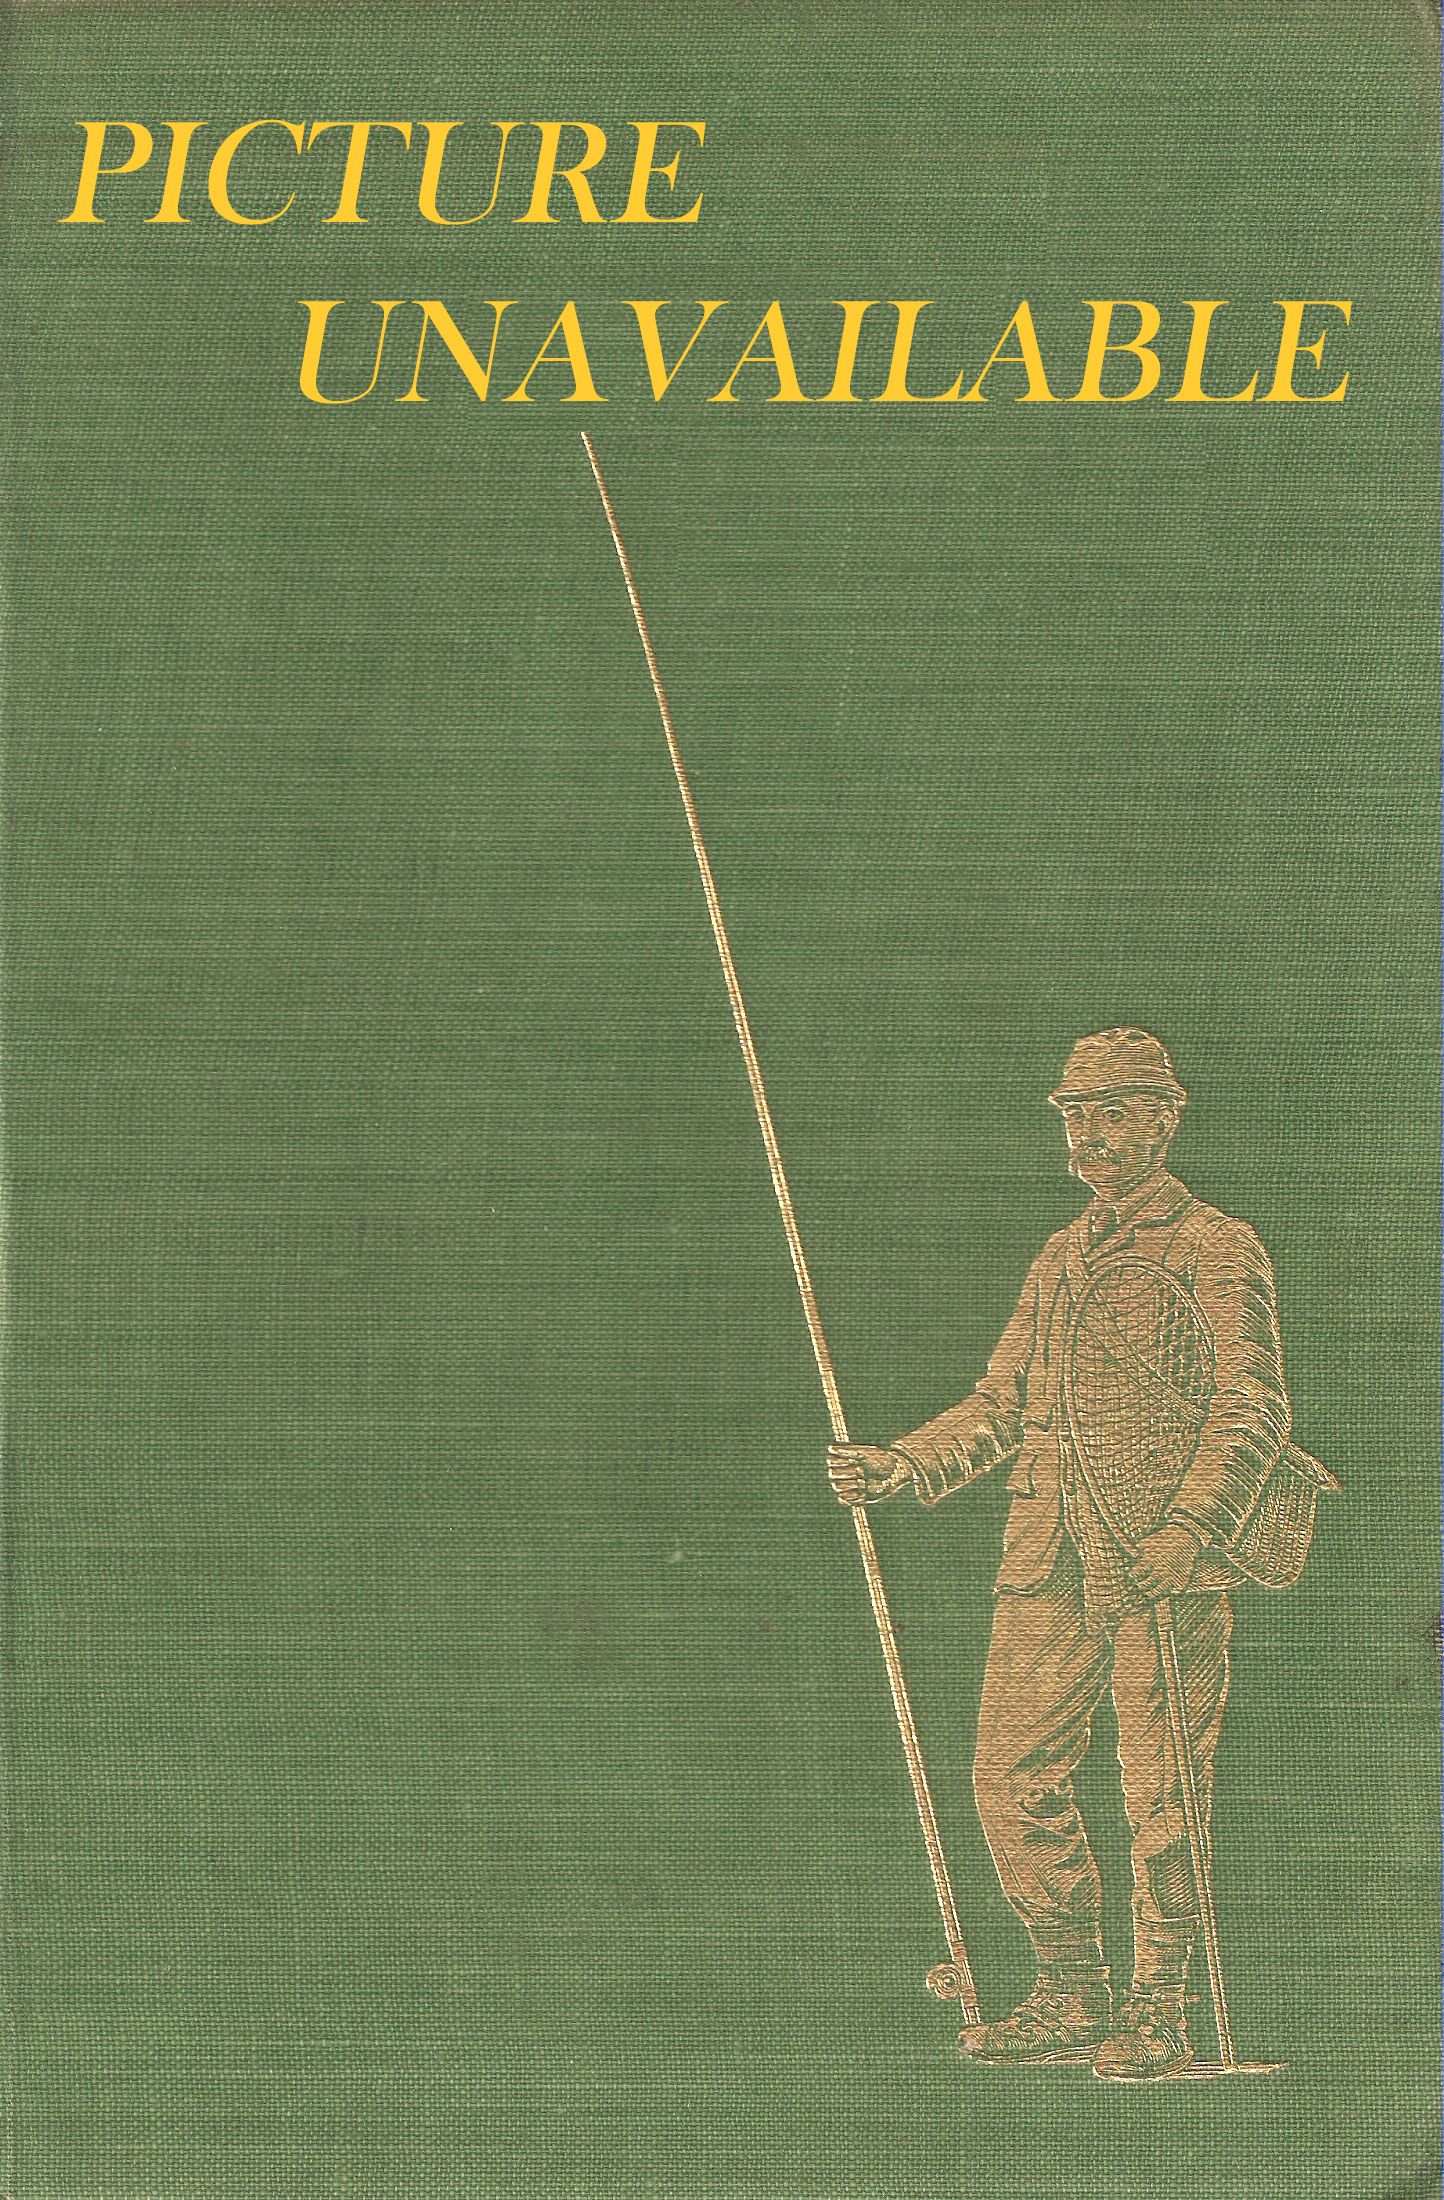 TROUT-FISHING AND SPORT IN MAORILAND. By G.D. Hamilton.